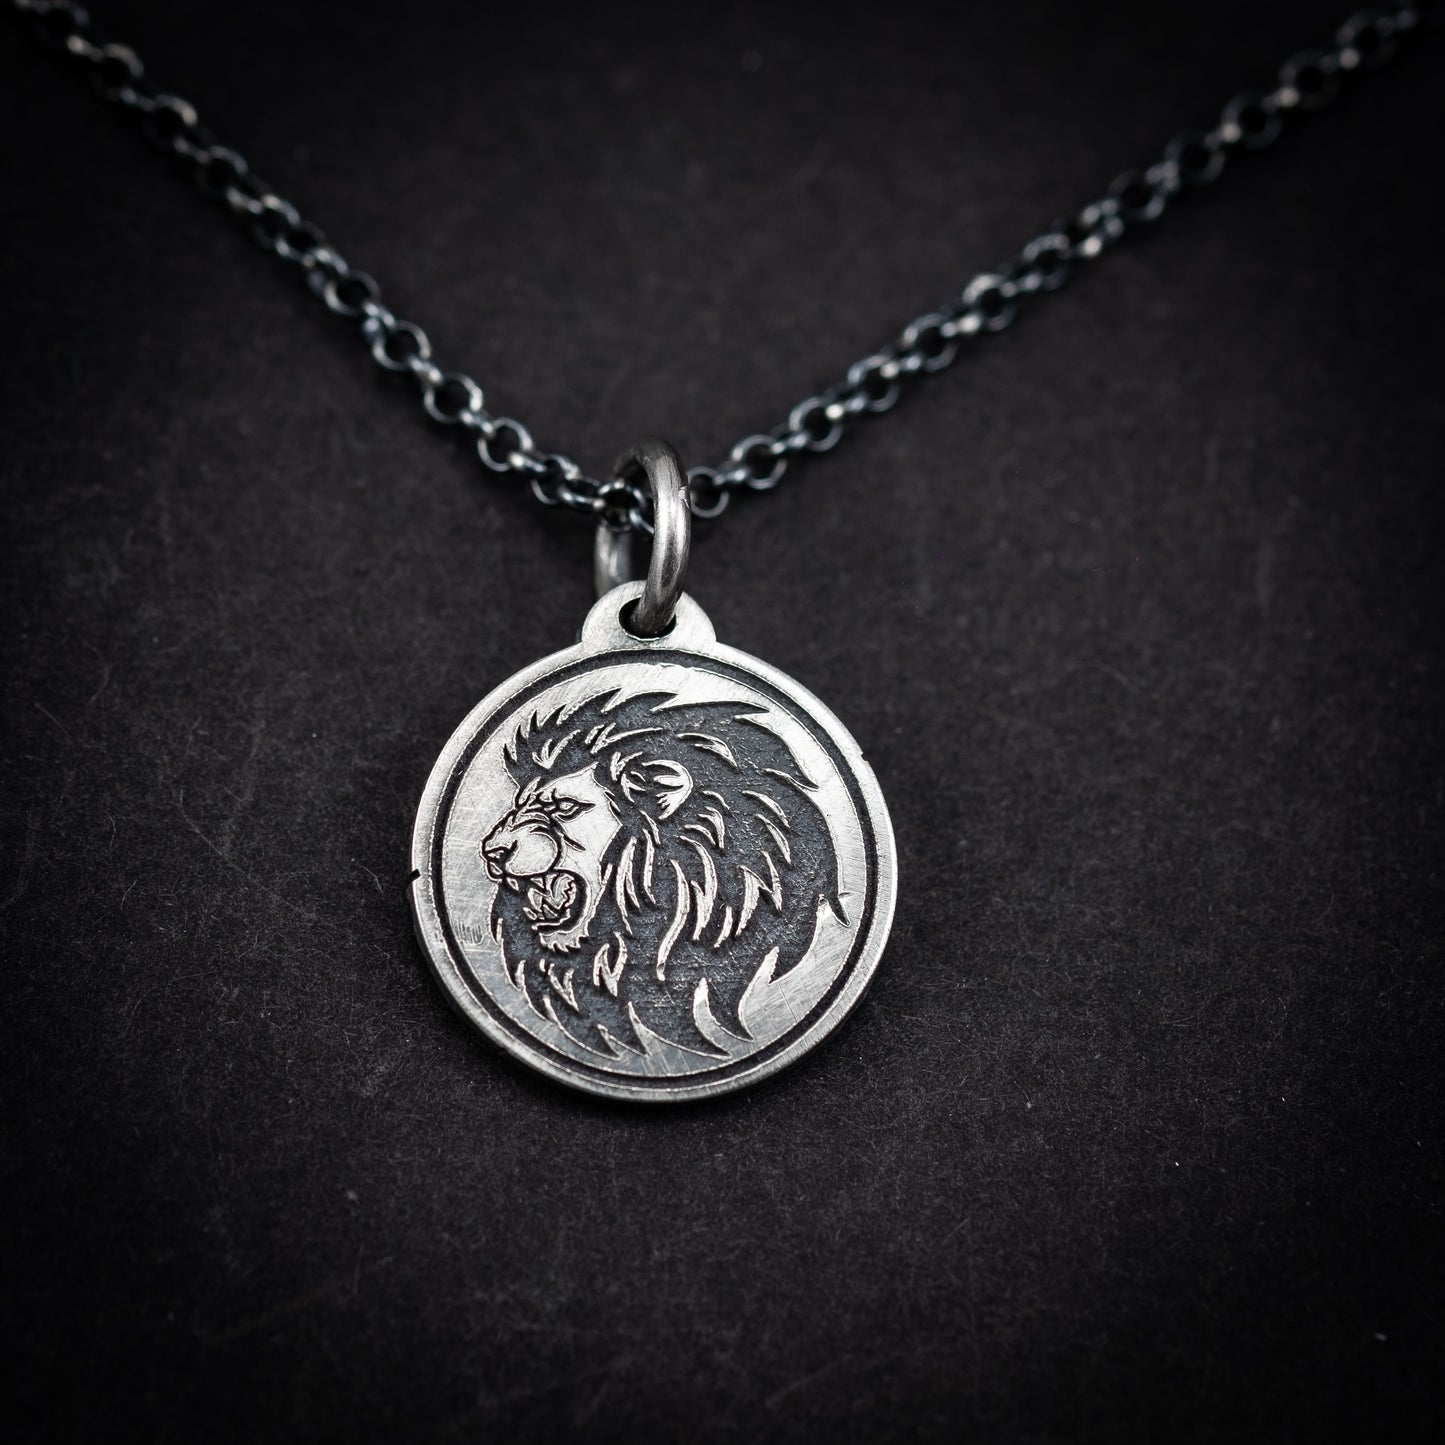 Lion Silver mens pendant necklace, Personalized Engraved Protection Strength amulet Leo zodiac necklace, Astrology jewelry, mens gift